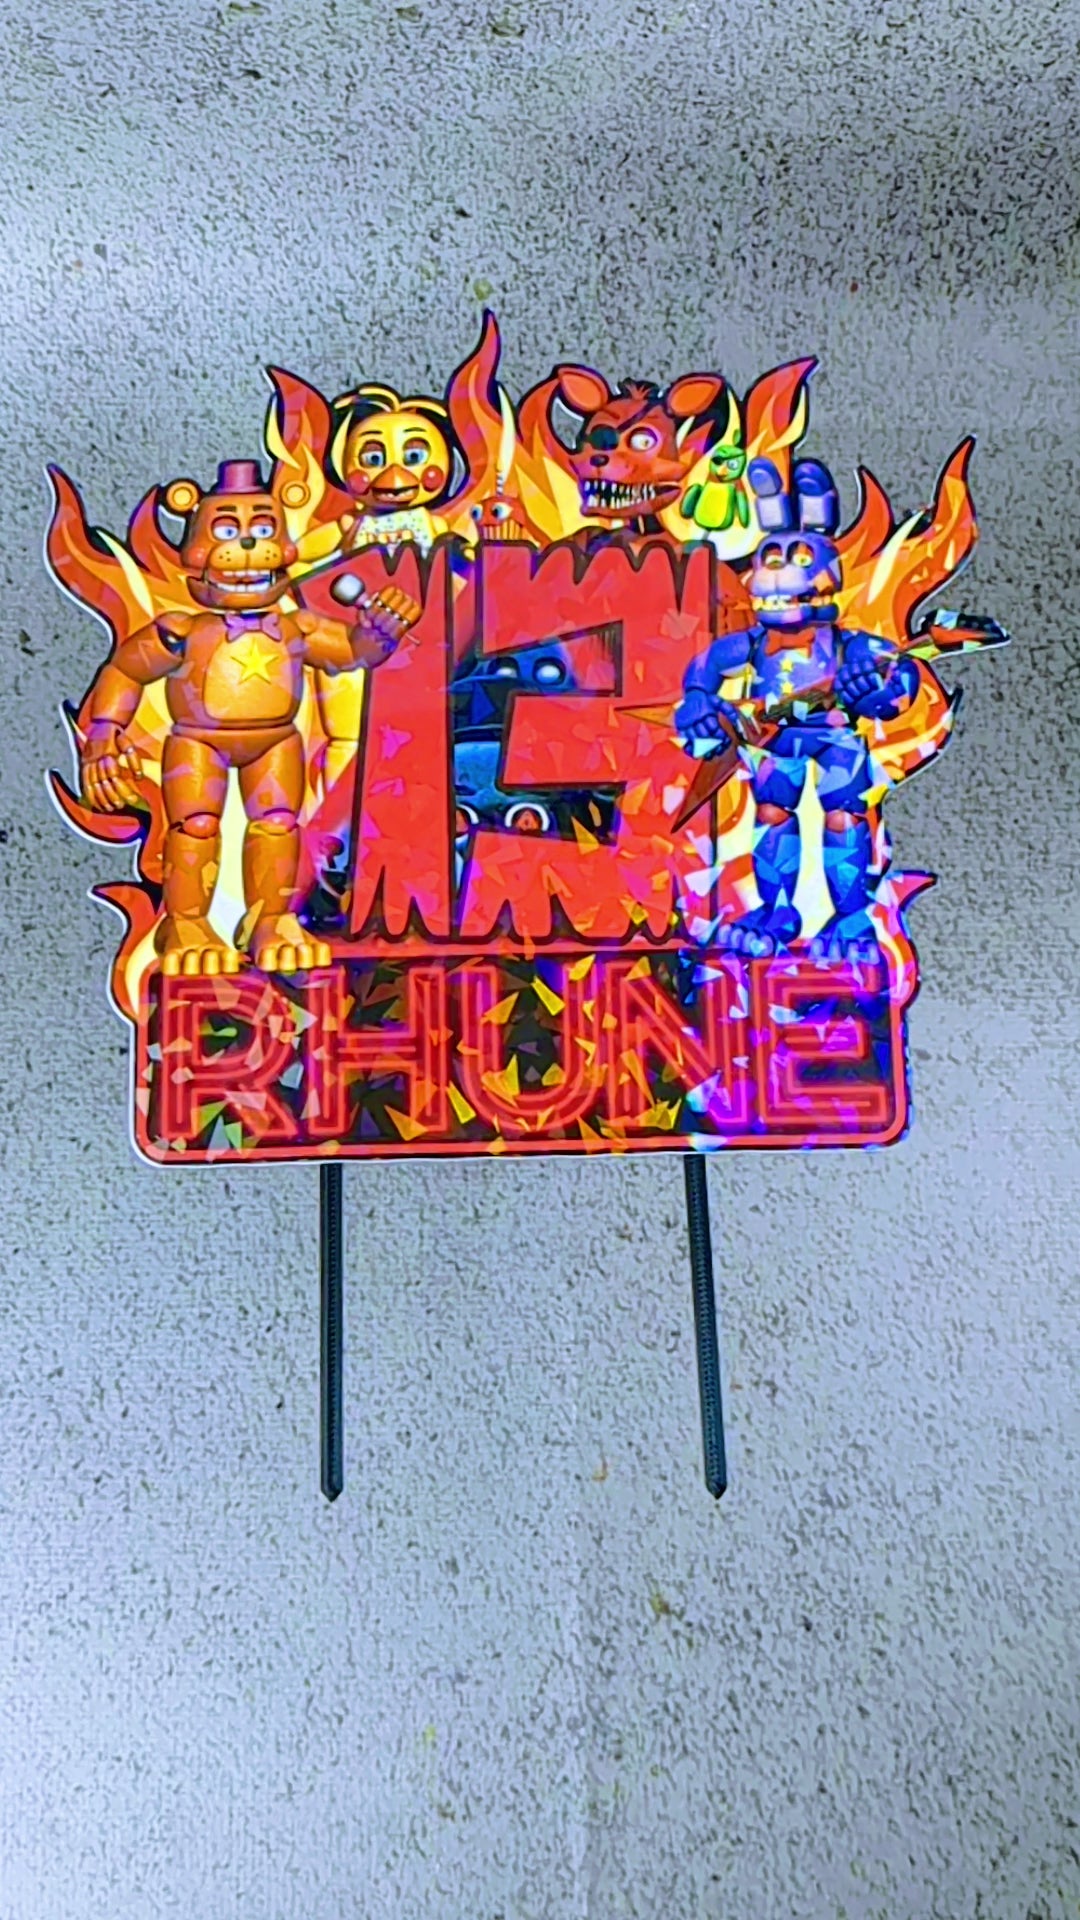 Five Nights at Freddy's Theme cake Topper LAMINATED DIY